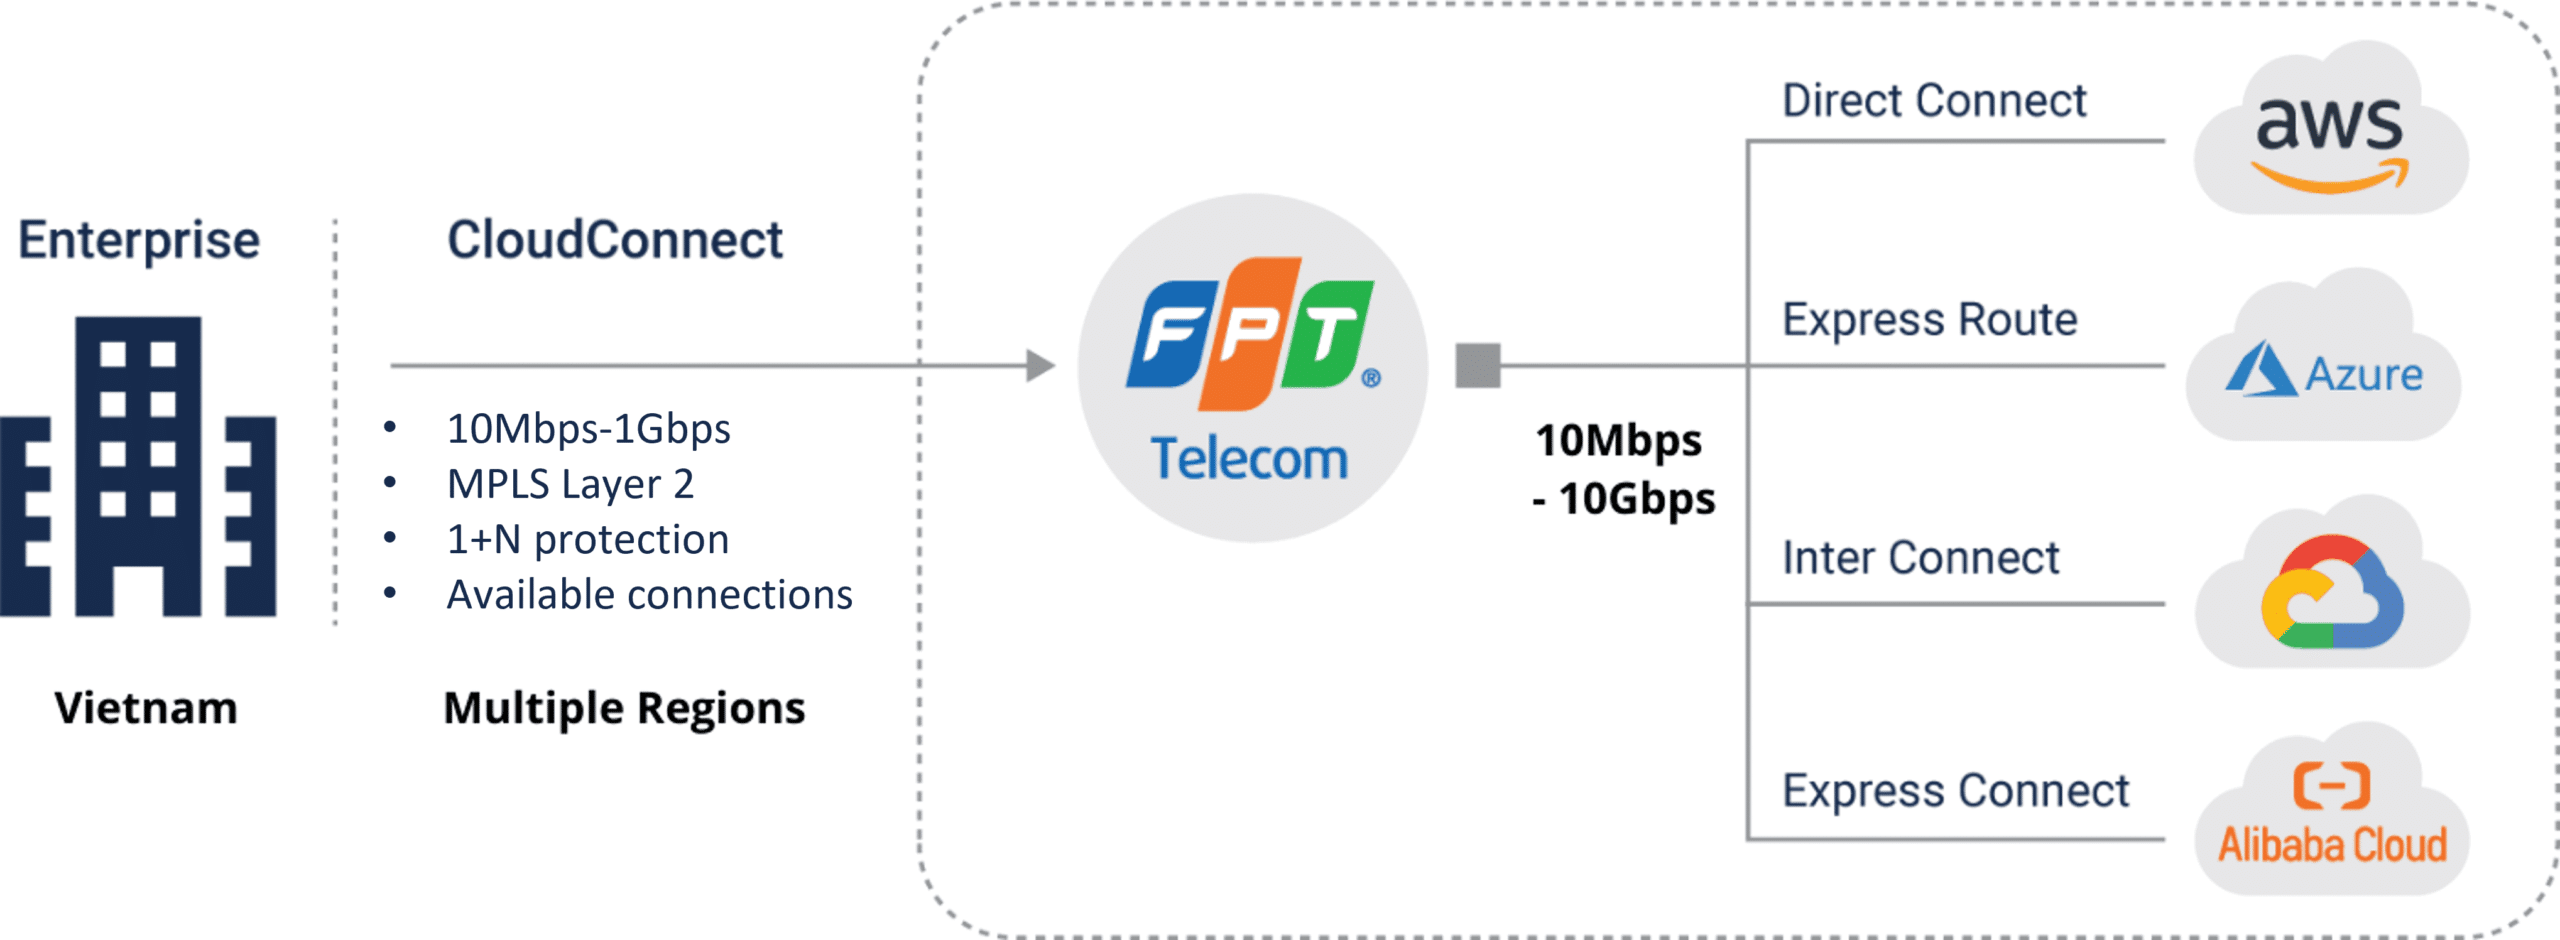 FPT Cloud Connect Infrastructure